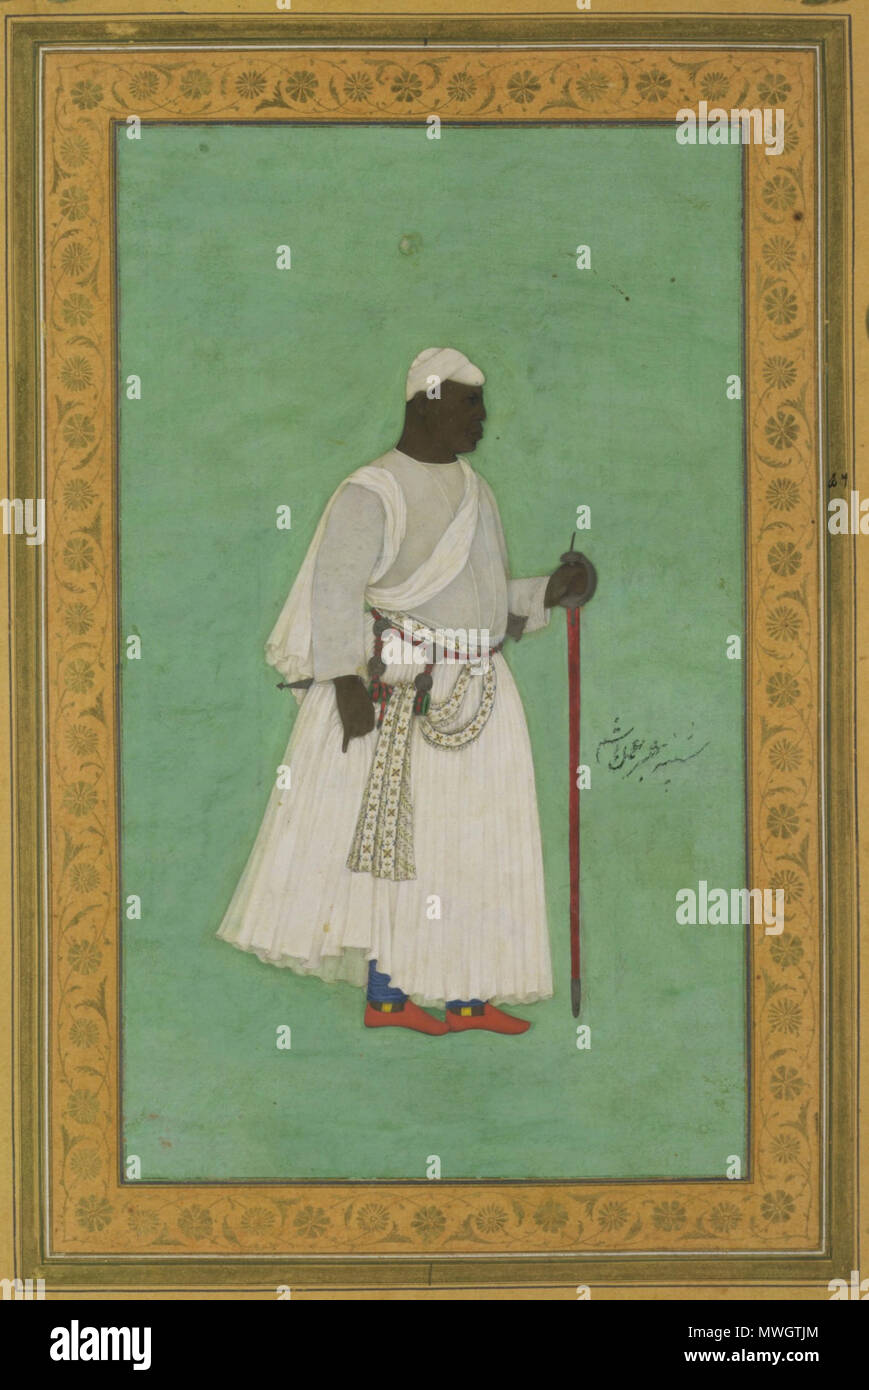 . Malik Amber of Ahmadnager(c.1605-27) . Malik Ambar was born in Ethopia in 1548 with the name Chapu and was sold into slavery. He was eventually bought by a leading member of the Nizam Shahi court of Ahmadnagar, one of the fragile sultanates of the Deccan. The slave became a soldier, and eventually a commander of the Nizam Shahi army, leading it against the Mughal army of the emperor Akbar. By 1600 he had become Regent of the Kingdom, effectively ruling Ahmadnagar until his death in 1626. His army scored significant victories against the Mughals during the reign of Jahangir. The Mughal army w Stock Photo